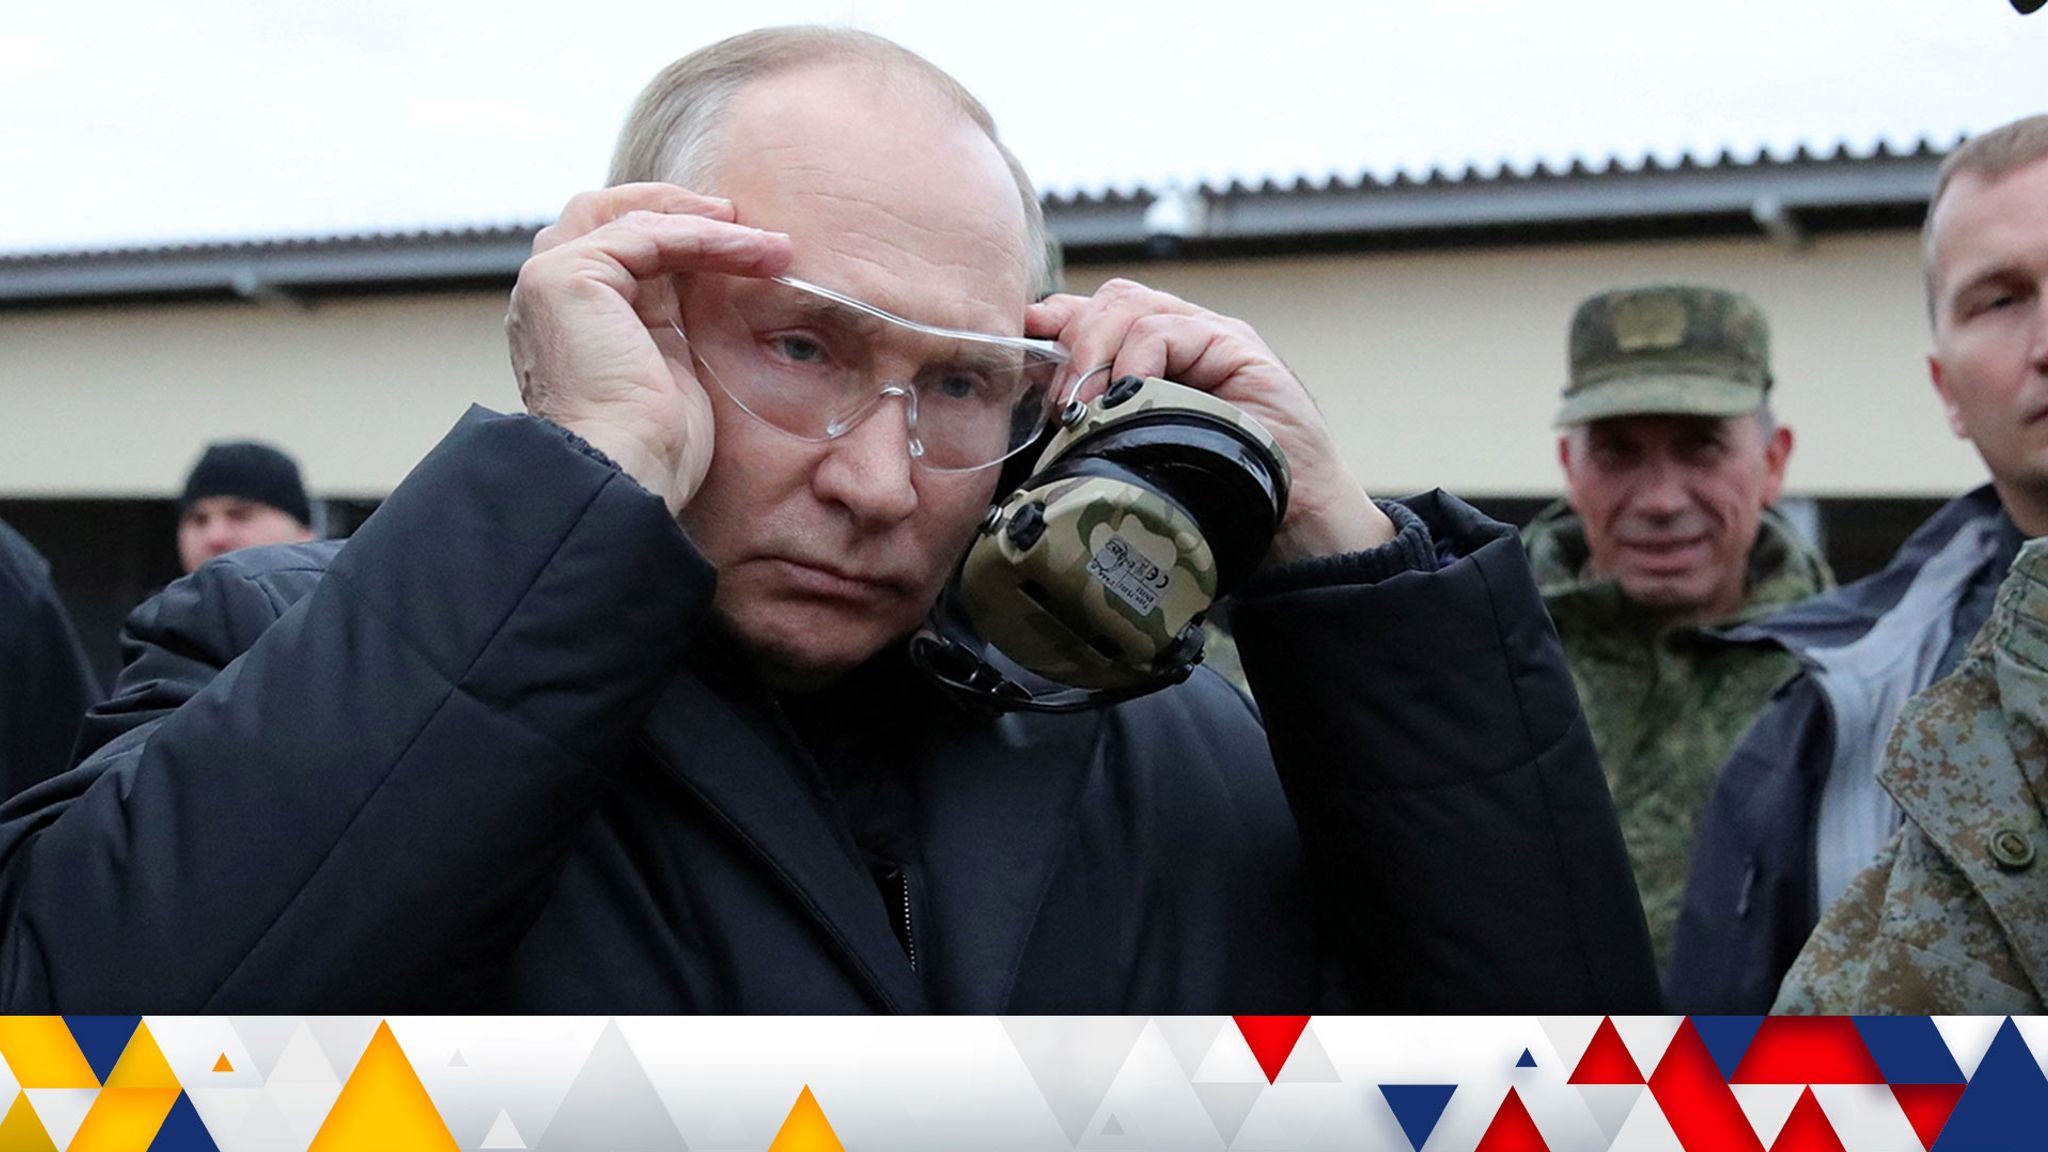 Putin orders Russia to increase size of armed forces by 137,000, Russia-Ukraine war News